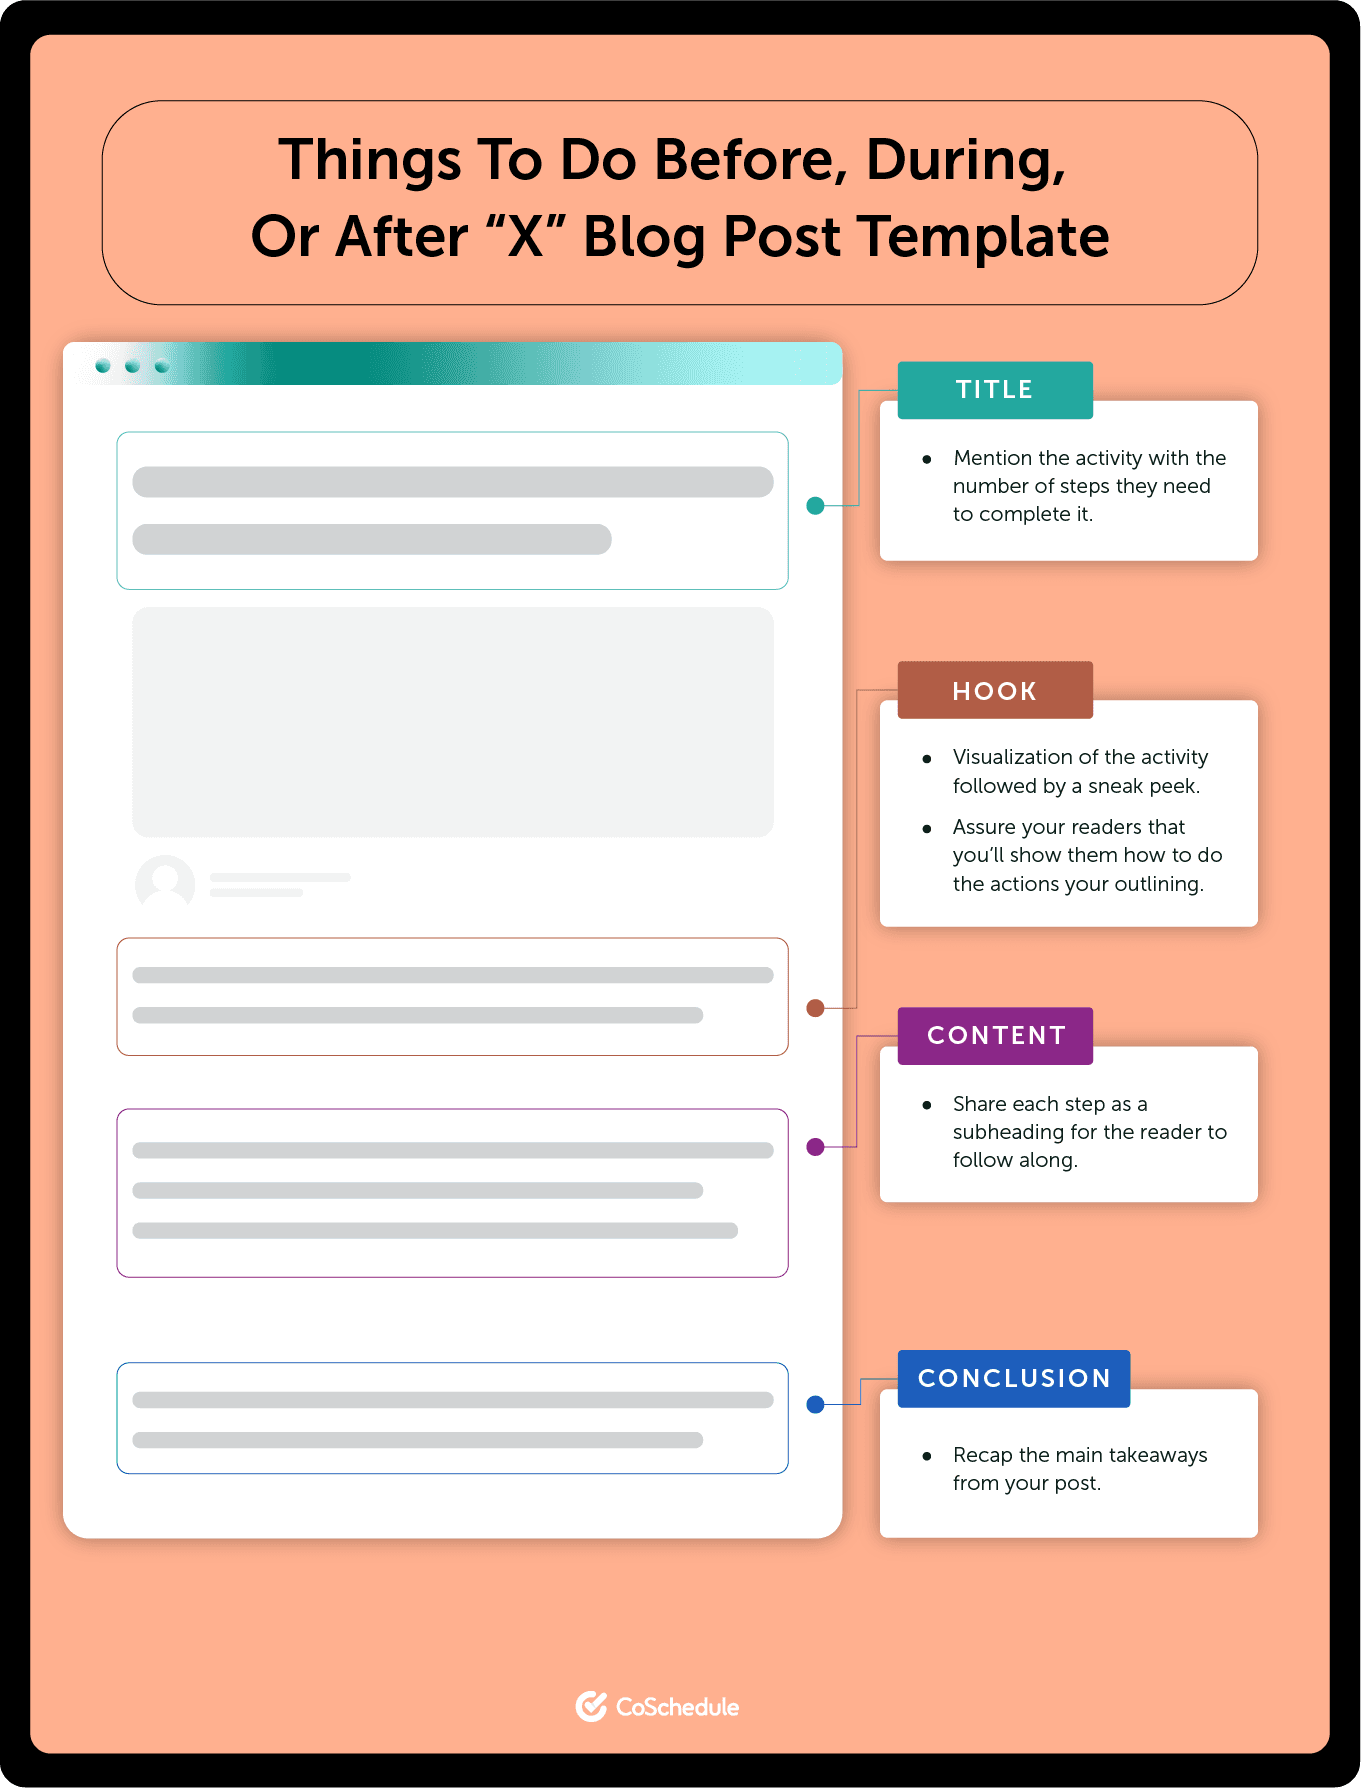 Things to do before, during, or after "X" Blog Post Template 